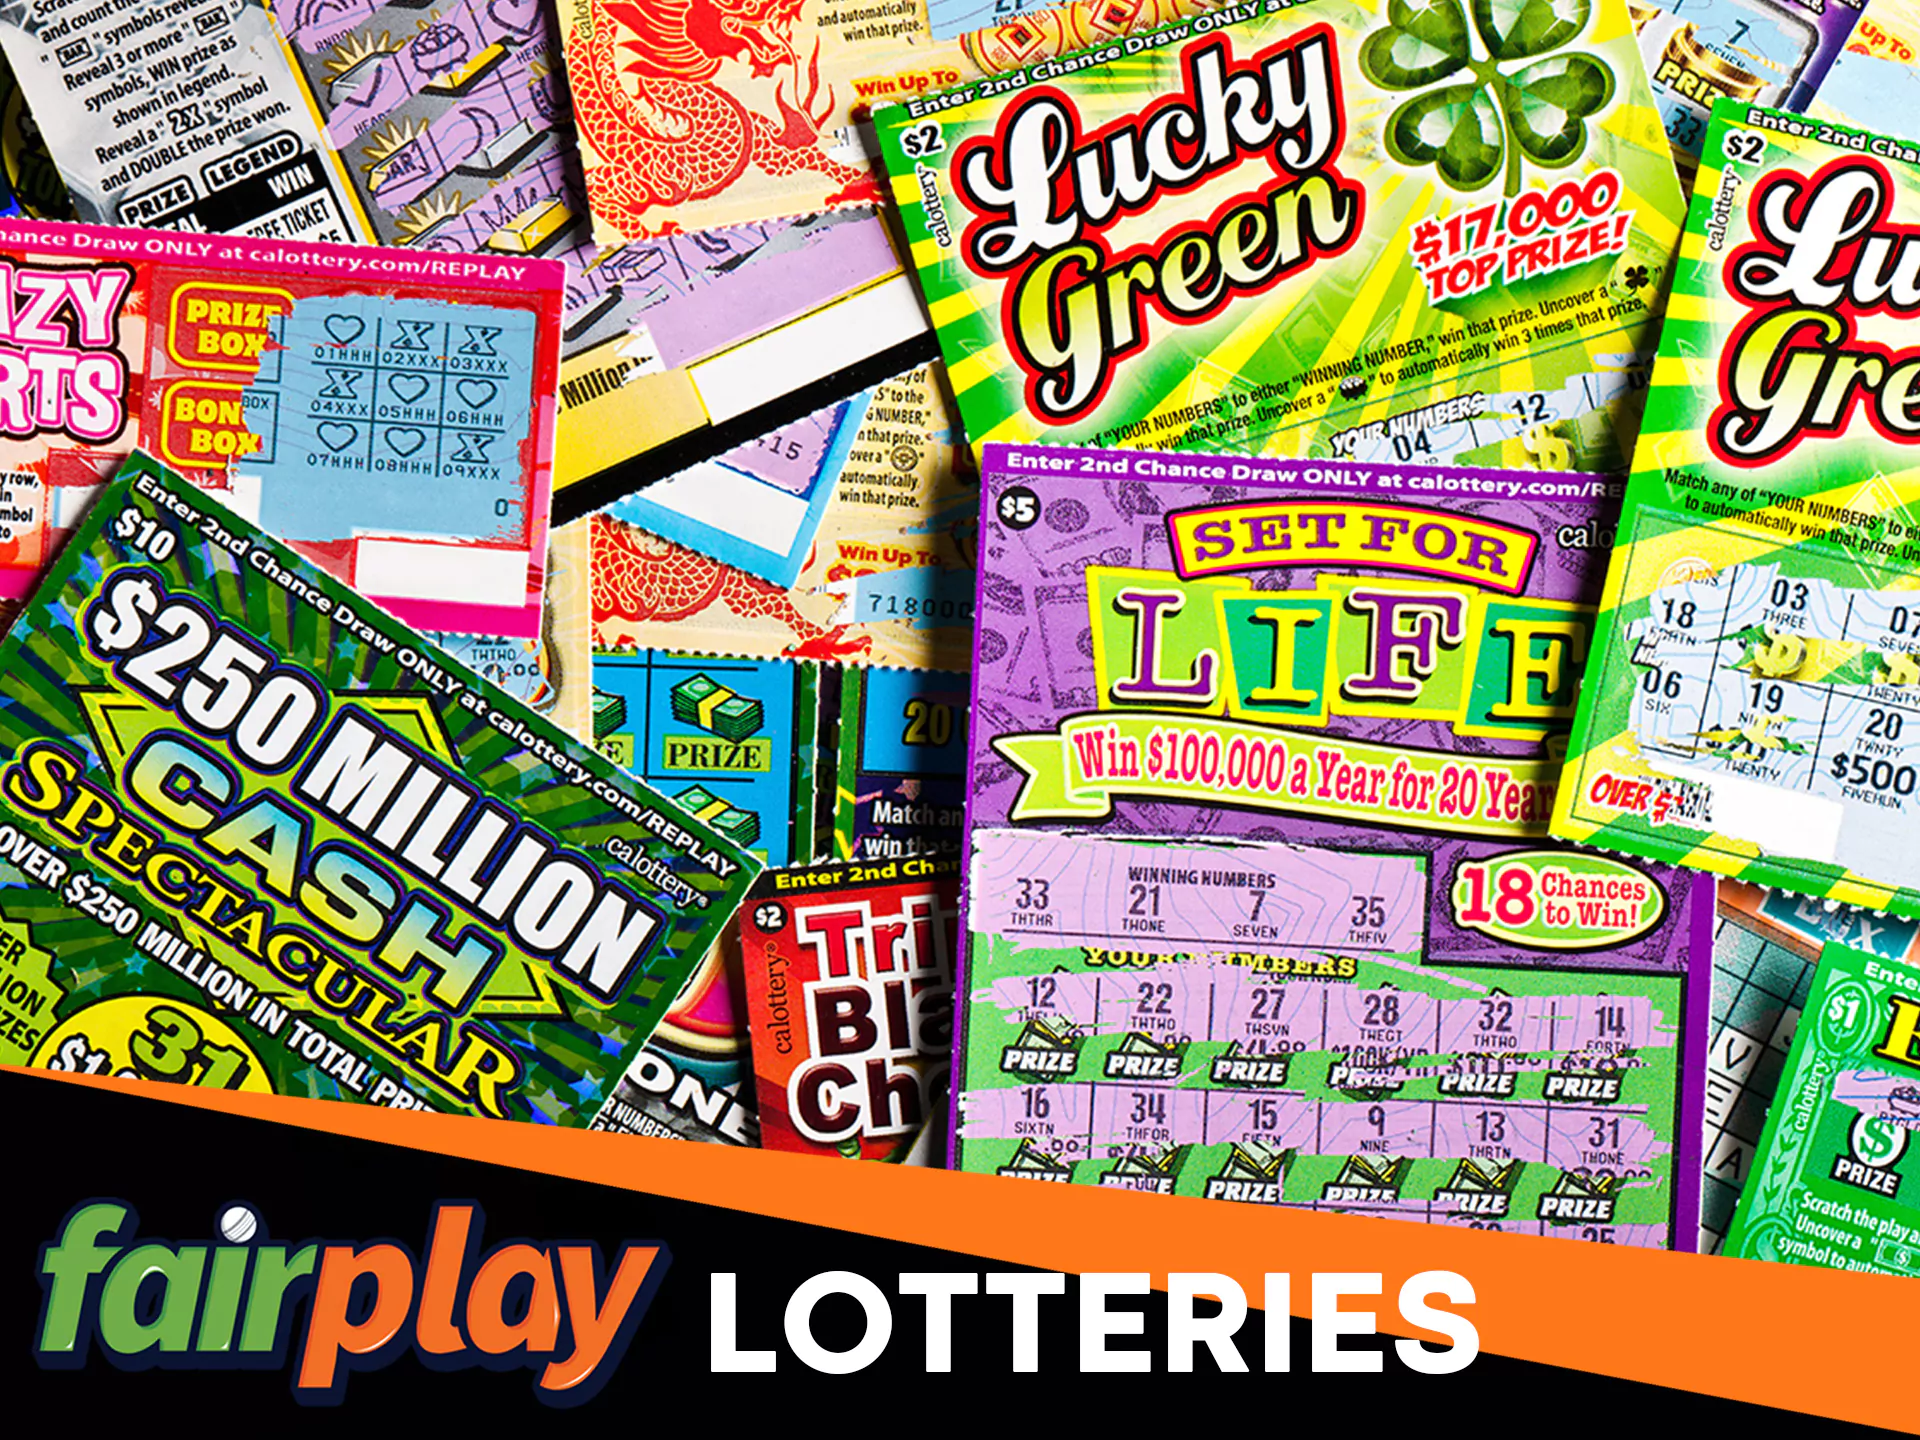 Play lotteries at Fairplay.